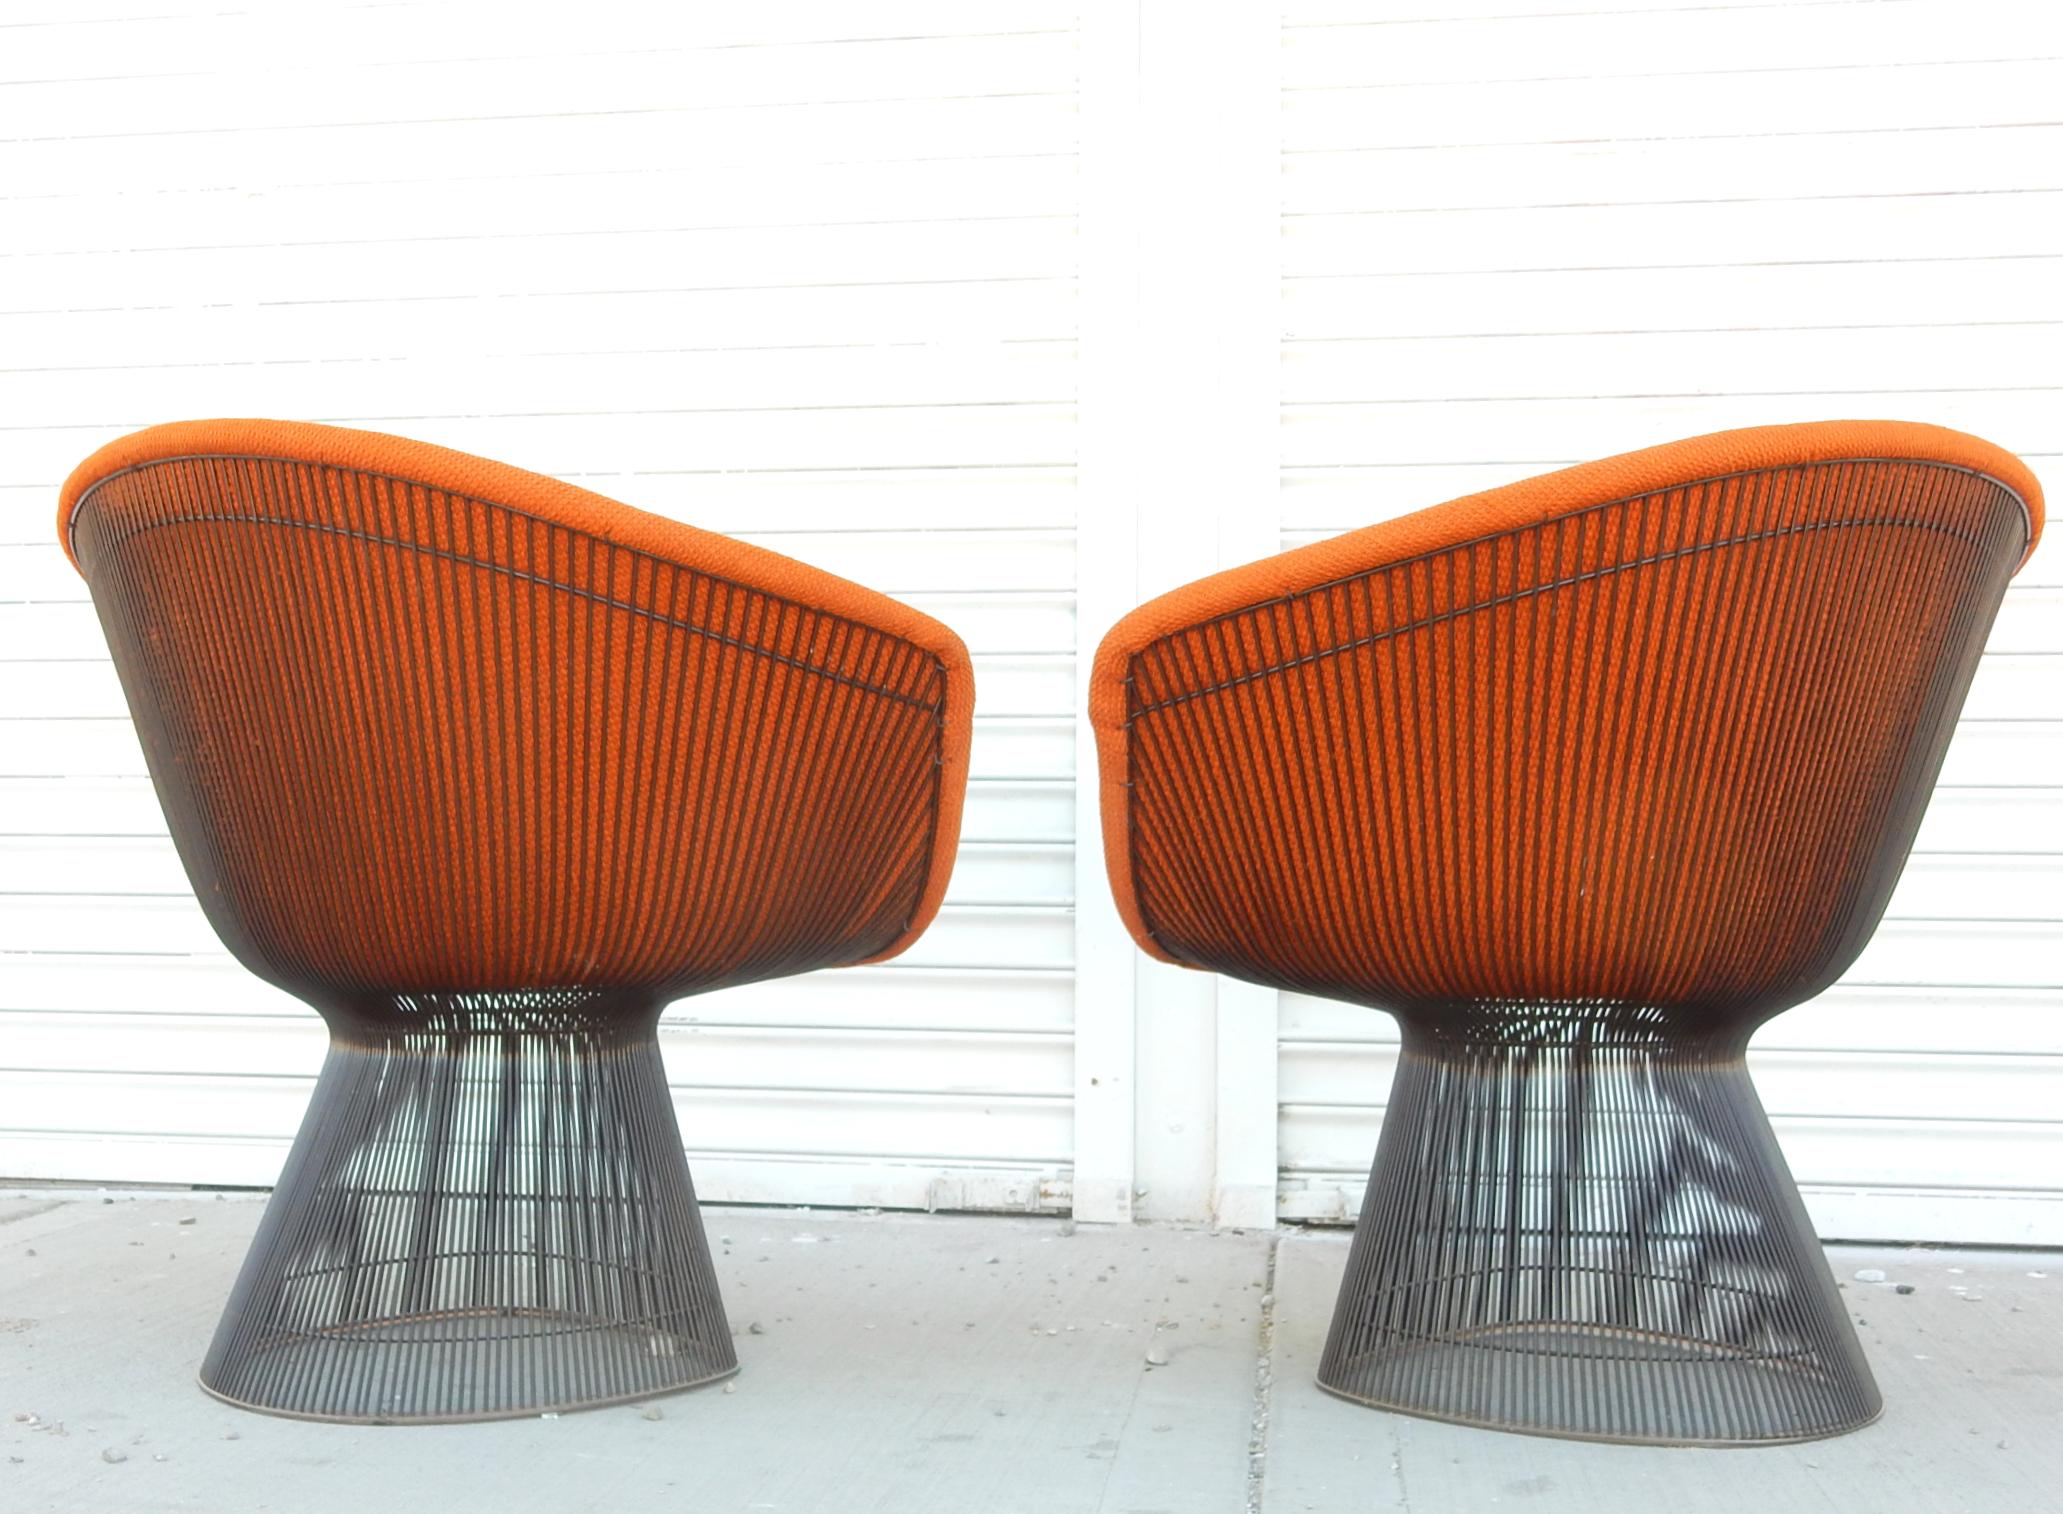 Late 20th Century Pair of Warren Platner for Knoll Lounge Chairs Mid-Century Modern, 1978